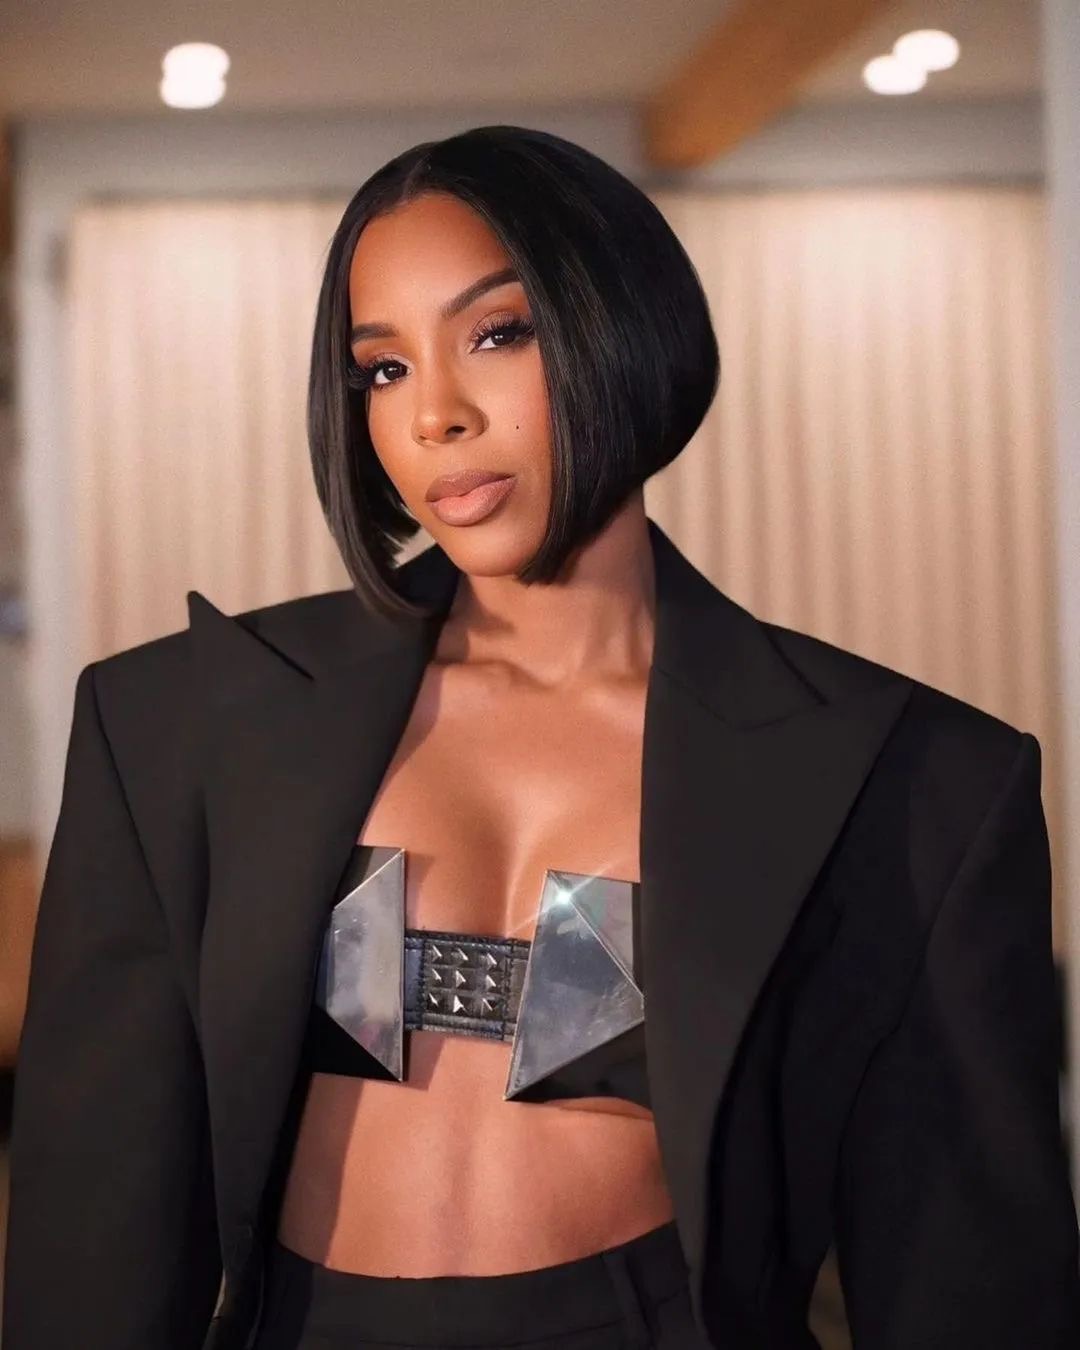 Kelly Rowland Wore a Black Giuseppe Di Morabito Look with a Metal Ashton Michael Bra and Black Ricagno Heels